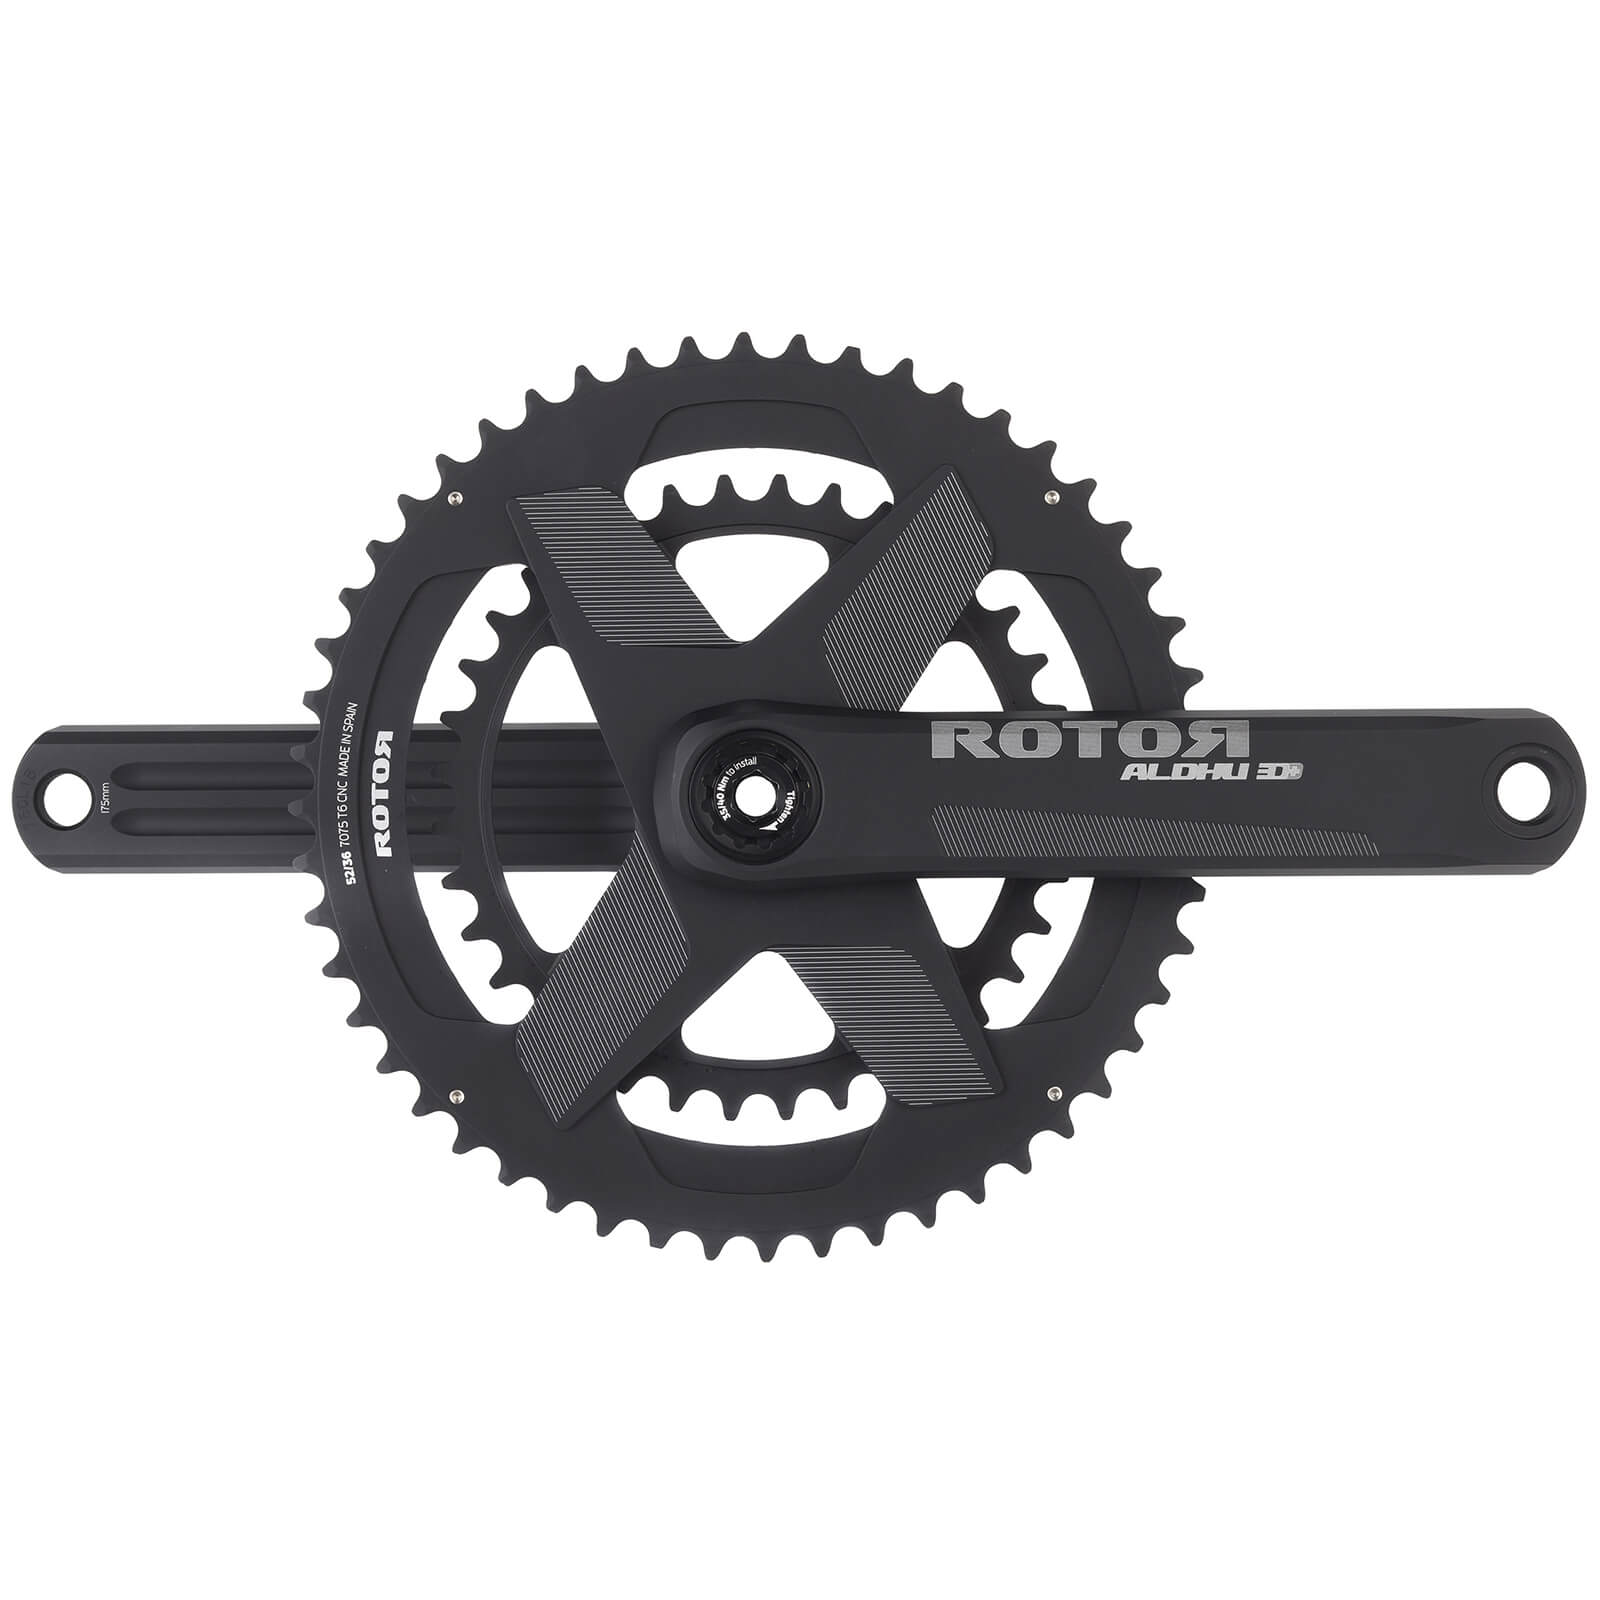 Rotor ALDHU Direct Mount Round Chainset - 170mm 53/39T